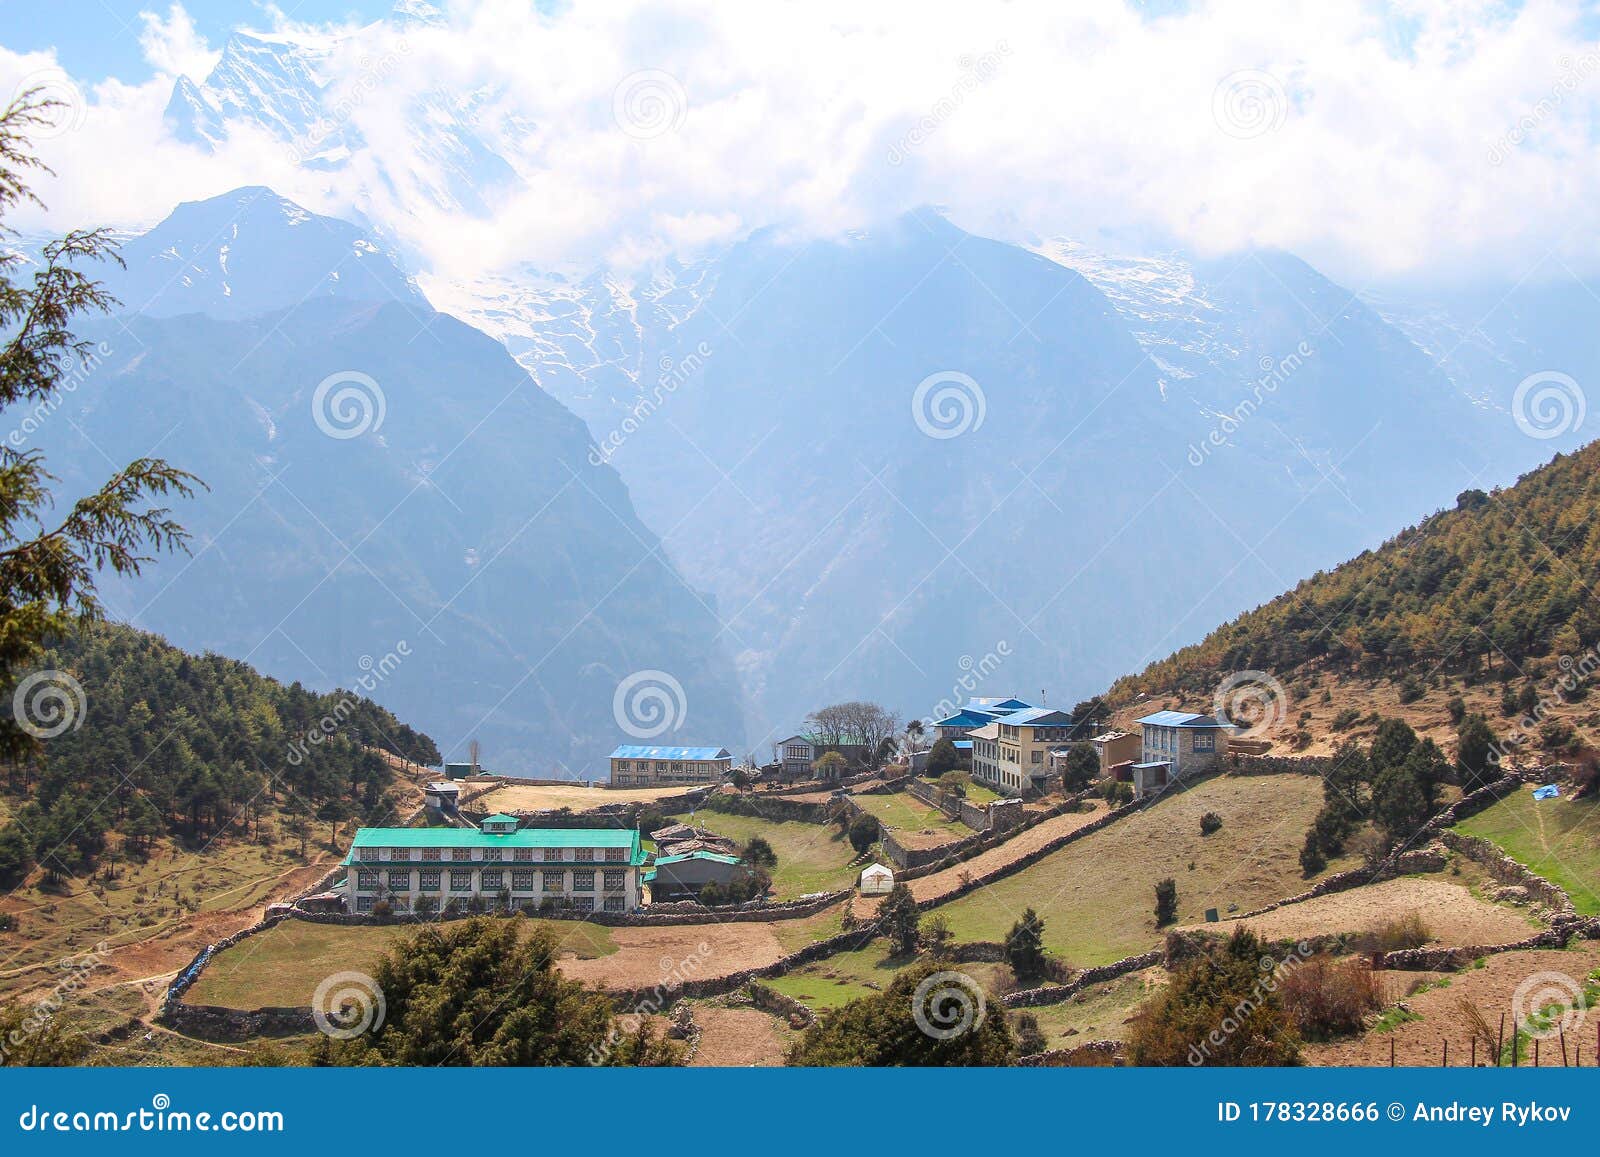 View of Sherpa Culture Museum in Namche Bazaar City in Nepal Editorial